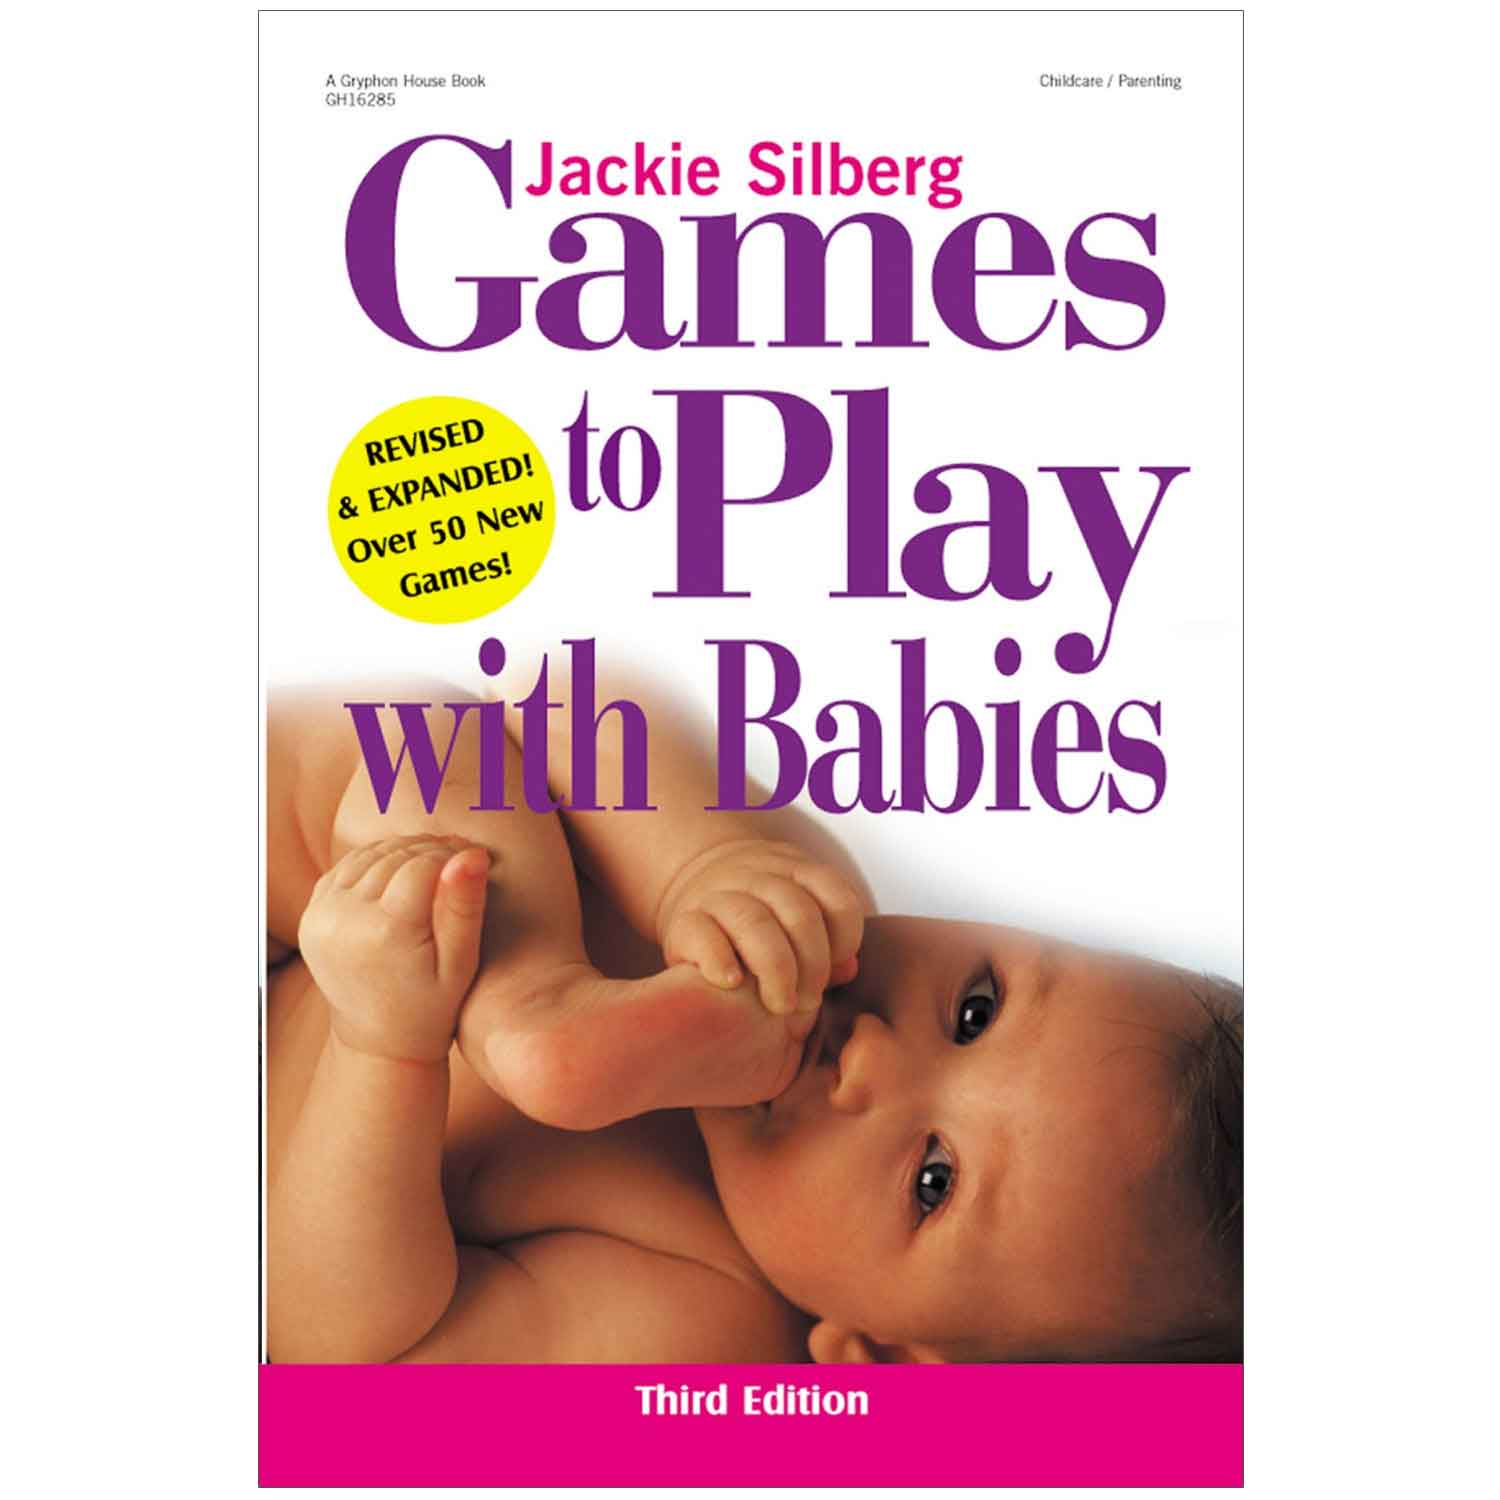 Games to Play With Babies